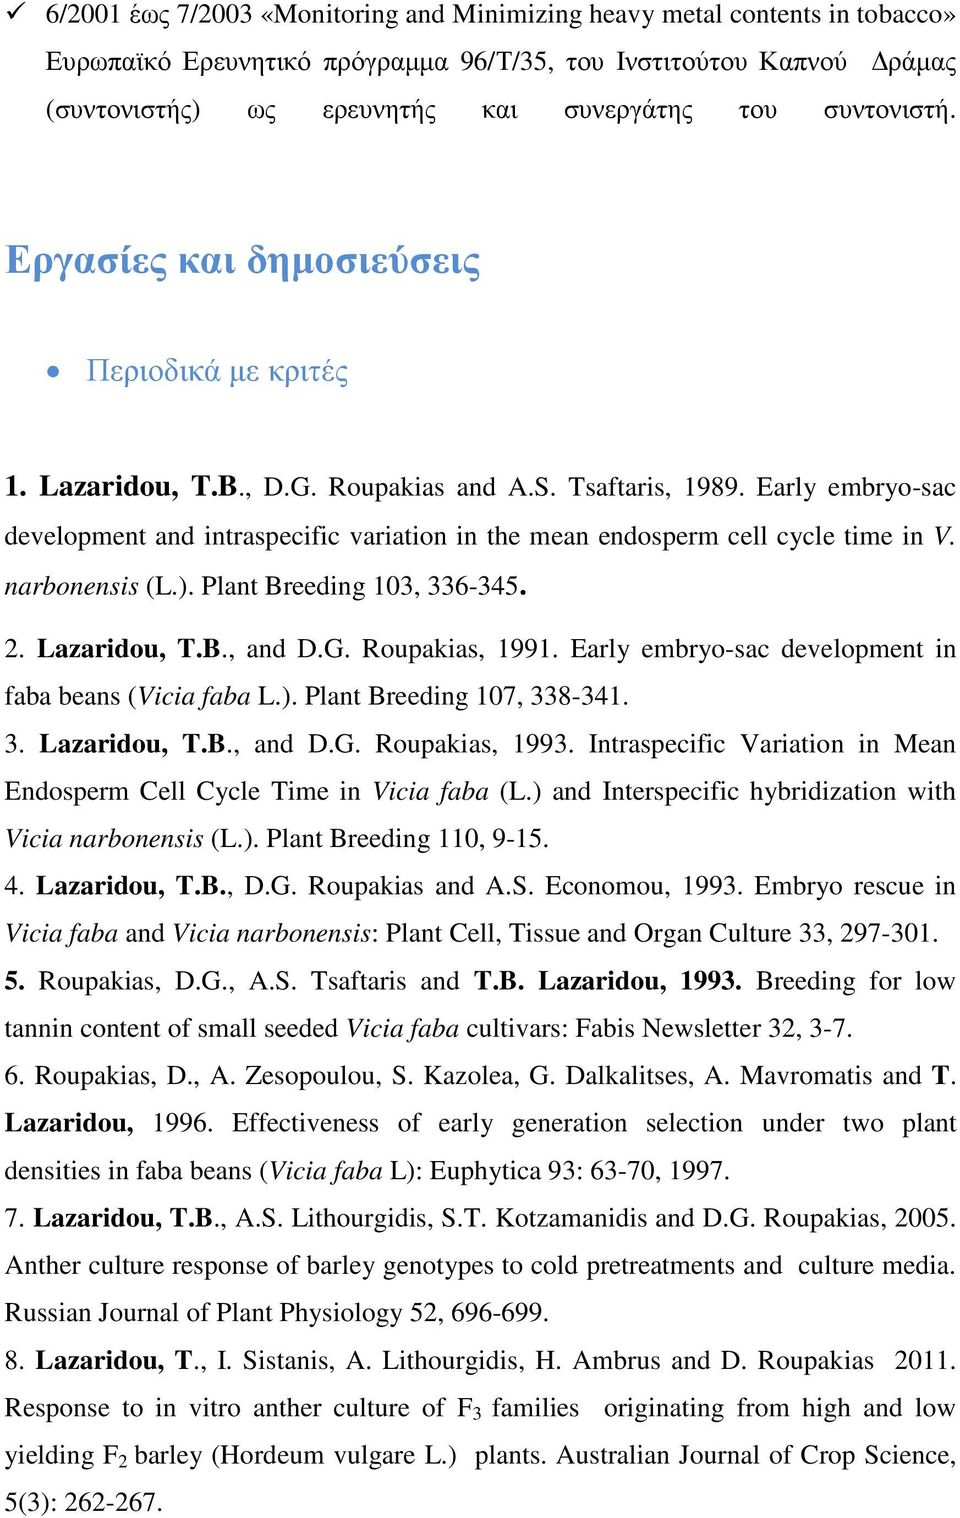 Early embryo-sac development and intraspecific variation in the mean endosperm cell cycle time in V. narbonensis (L.). Plant Breeding 103, 336-345. 2. Lazaridou, T.B., and D.G. Roupakias, 1991.